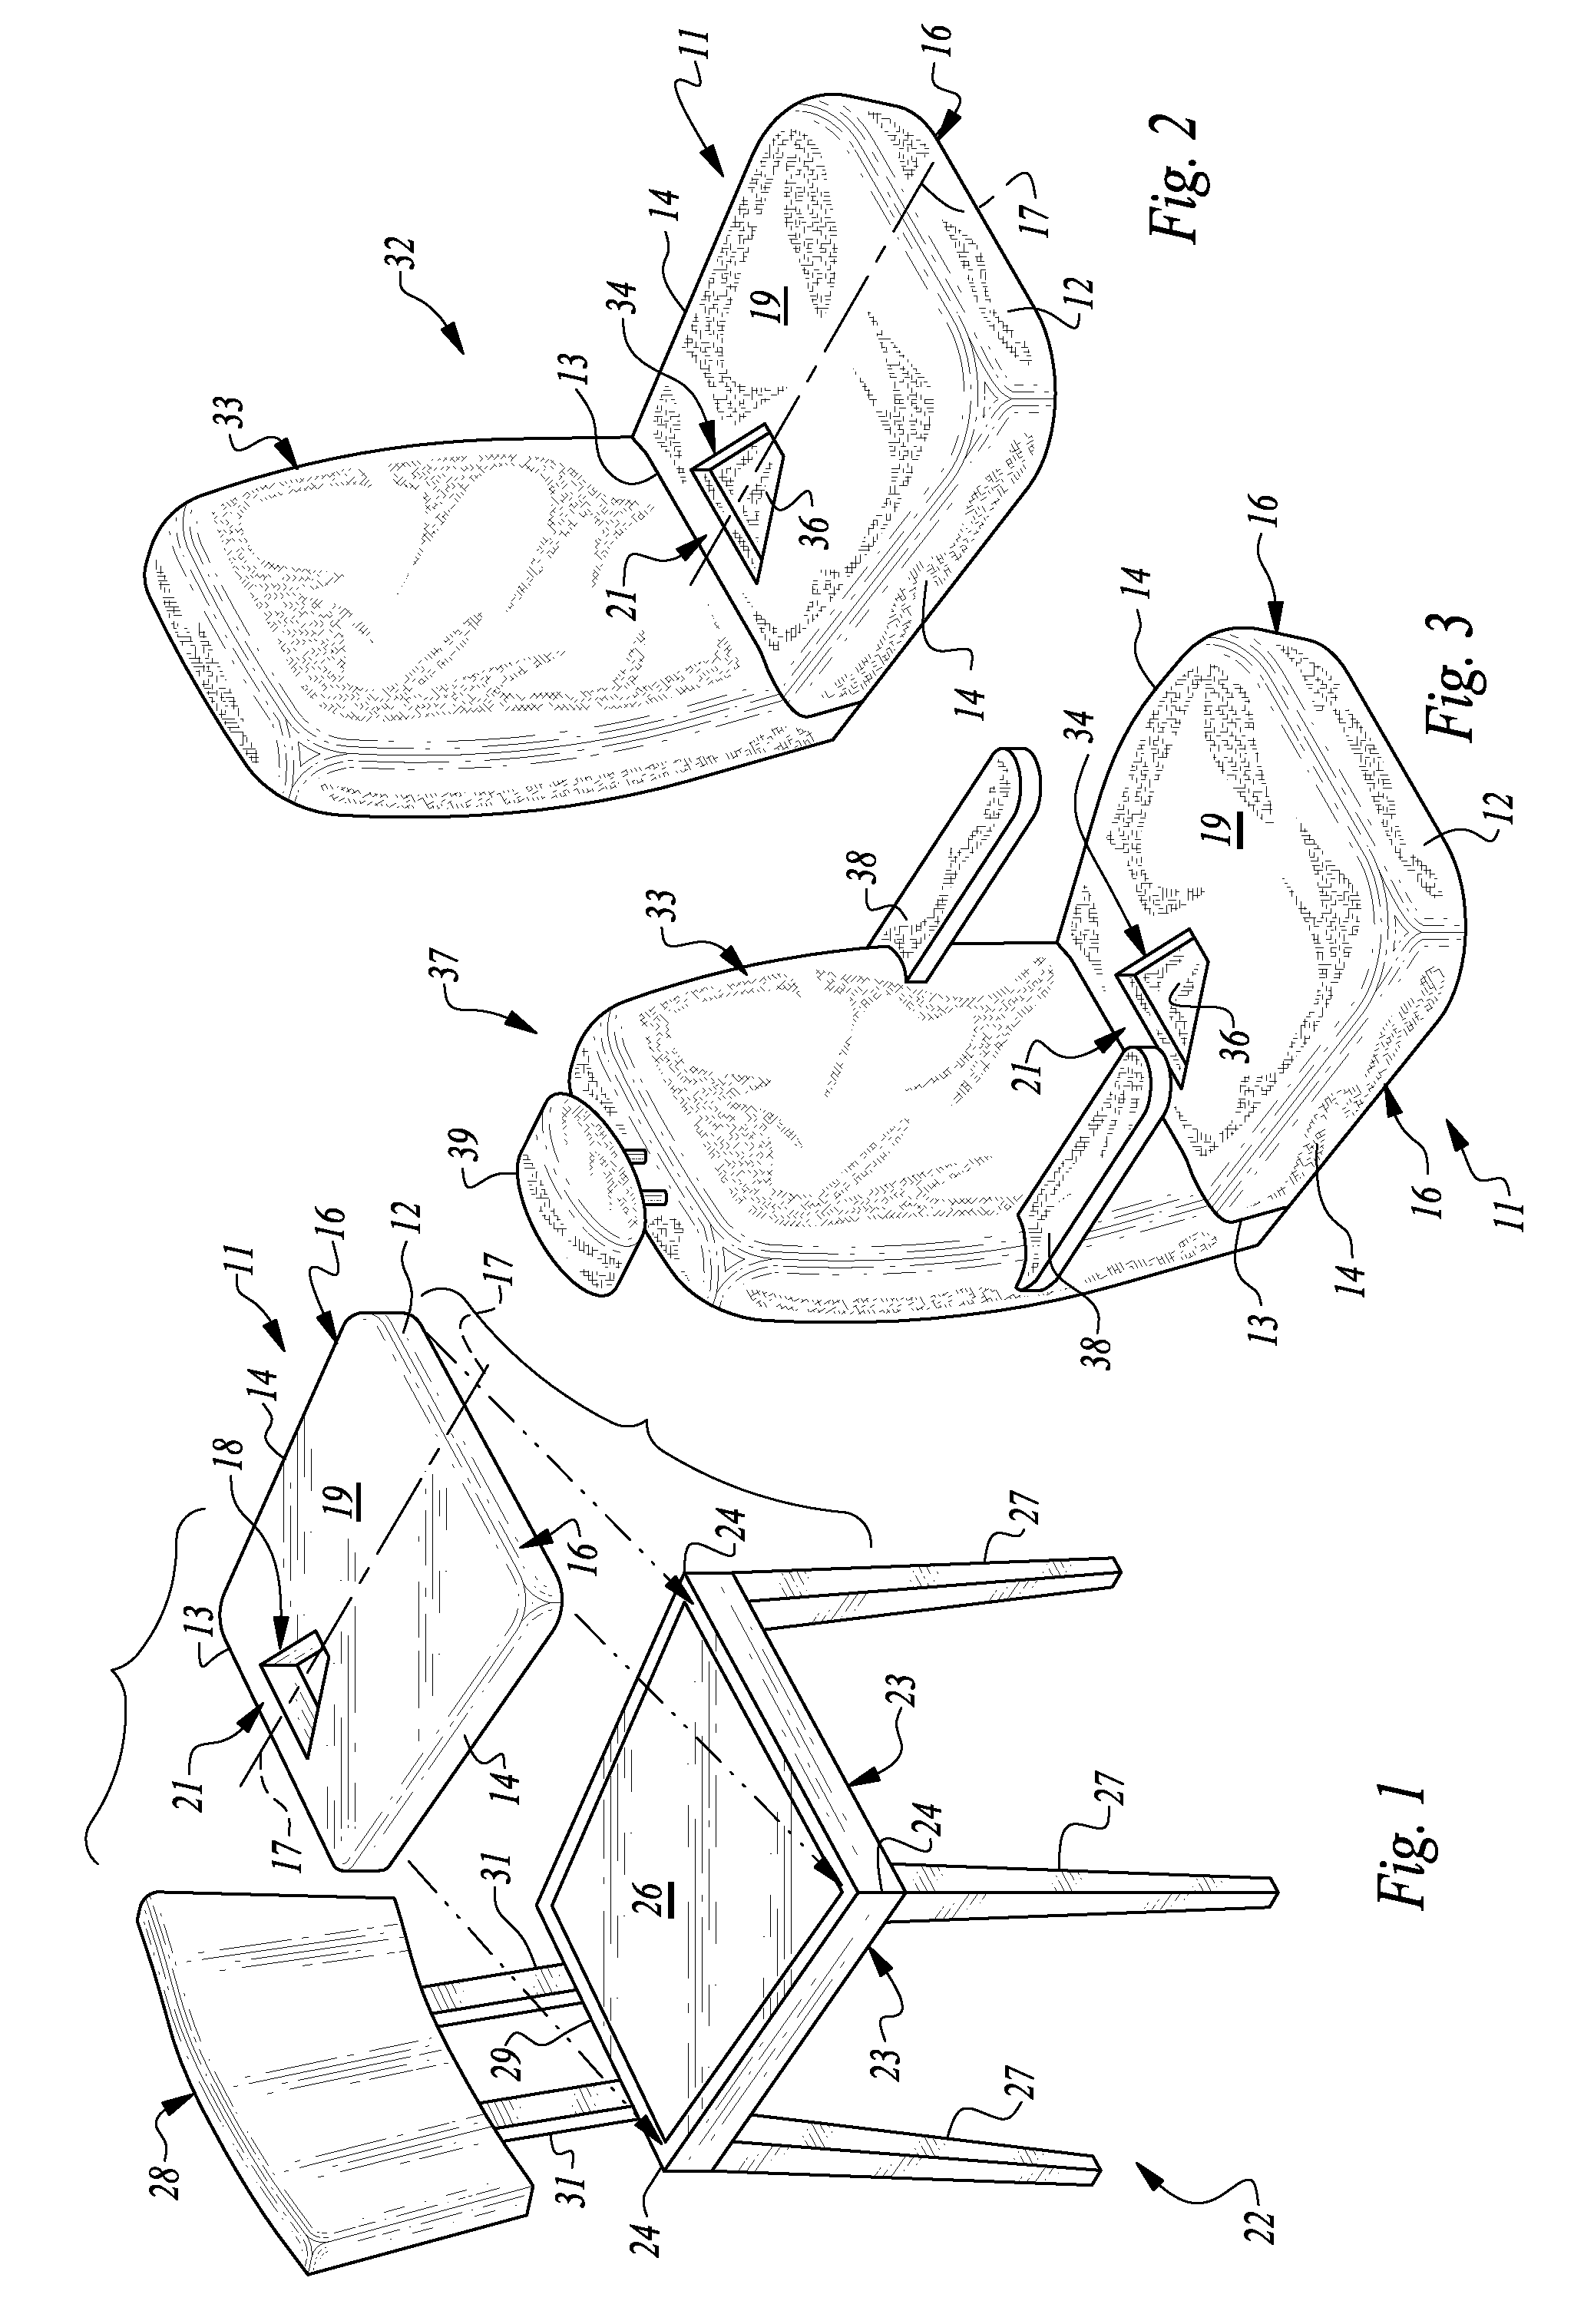 Seat Cushion With Recessed Region To Provide Spinal Decompression